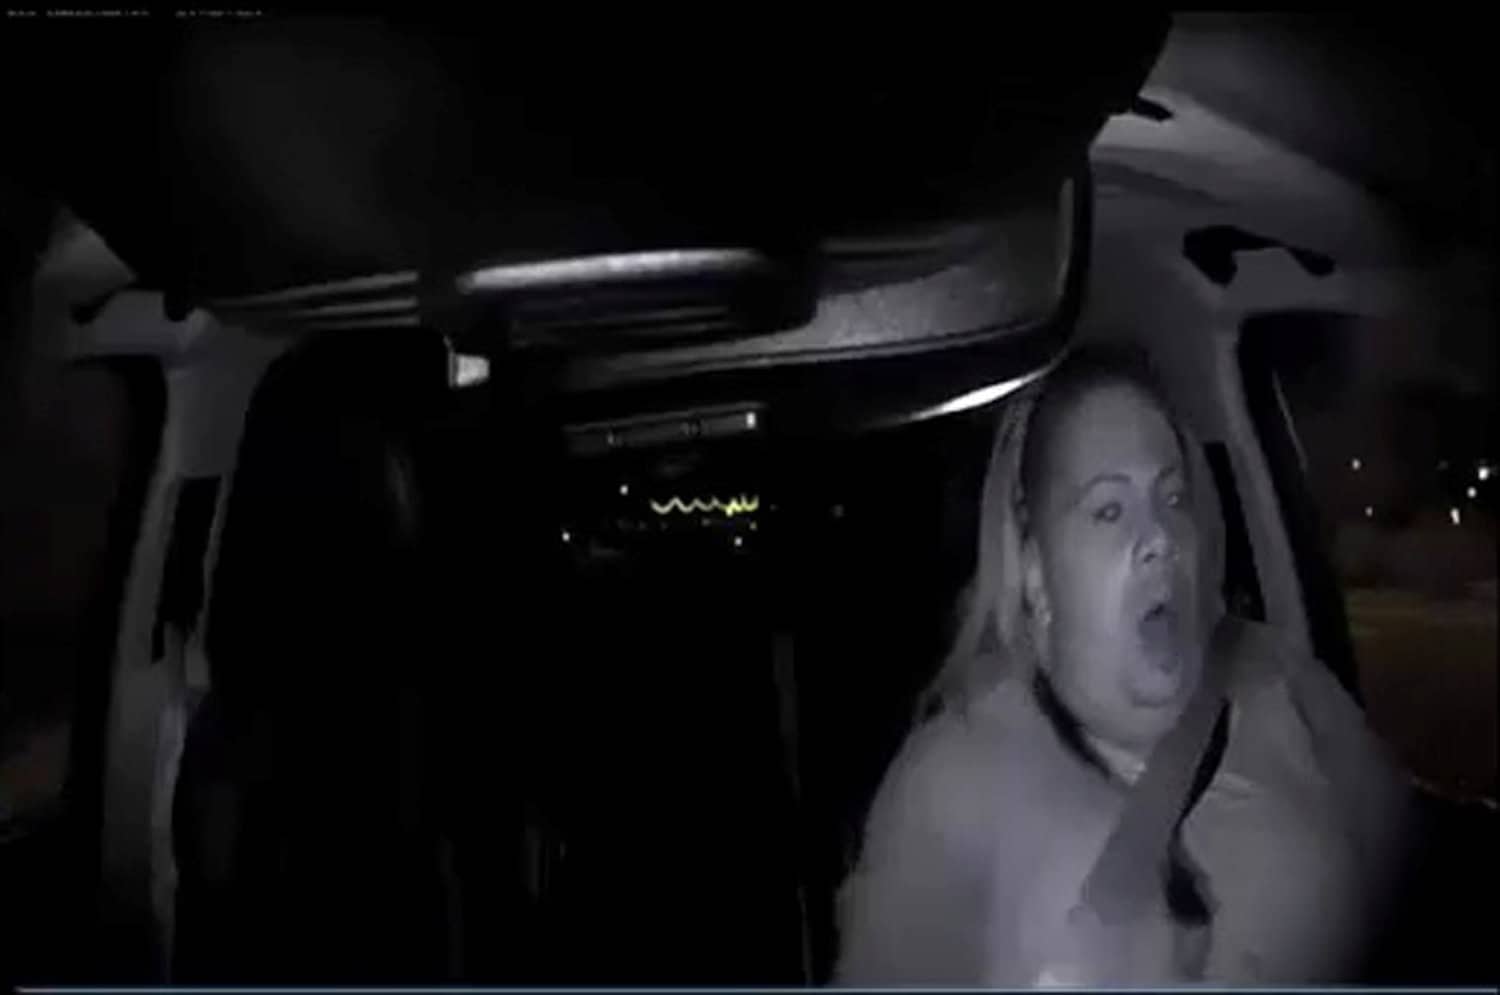 A handout photo of a still frame taken from video released March 21, 2018 showing the interior view of an unidentified operator in a self-driving Uber vehicle reacting as she looks through the windshield leading up to a fatal collision in Tempe